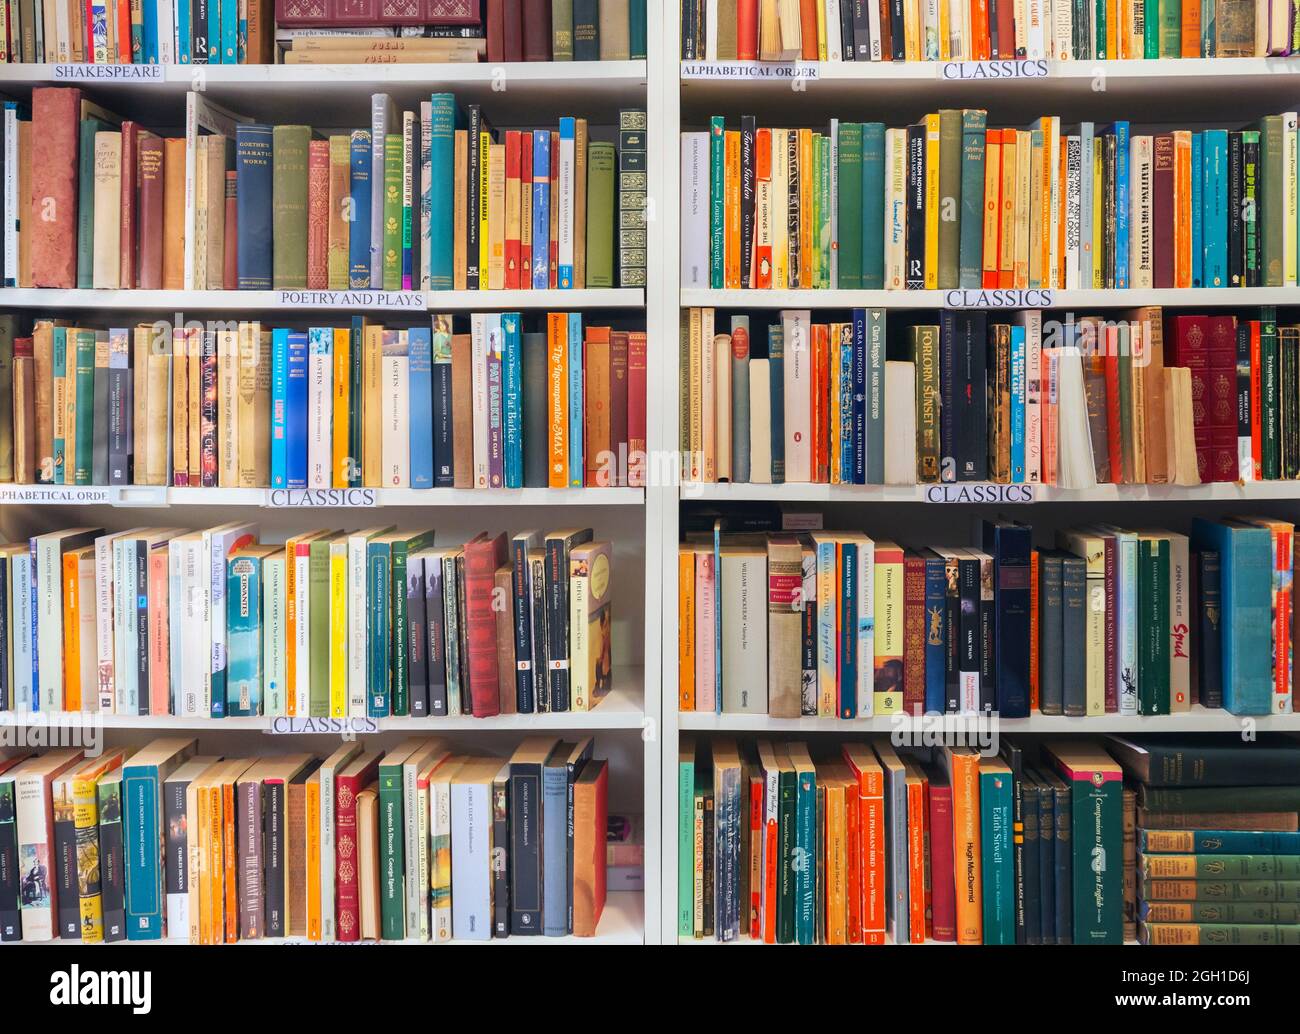 Shelves of classic books in the English language. Stock Photo